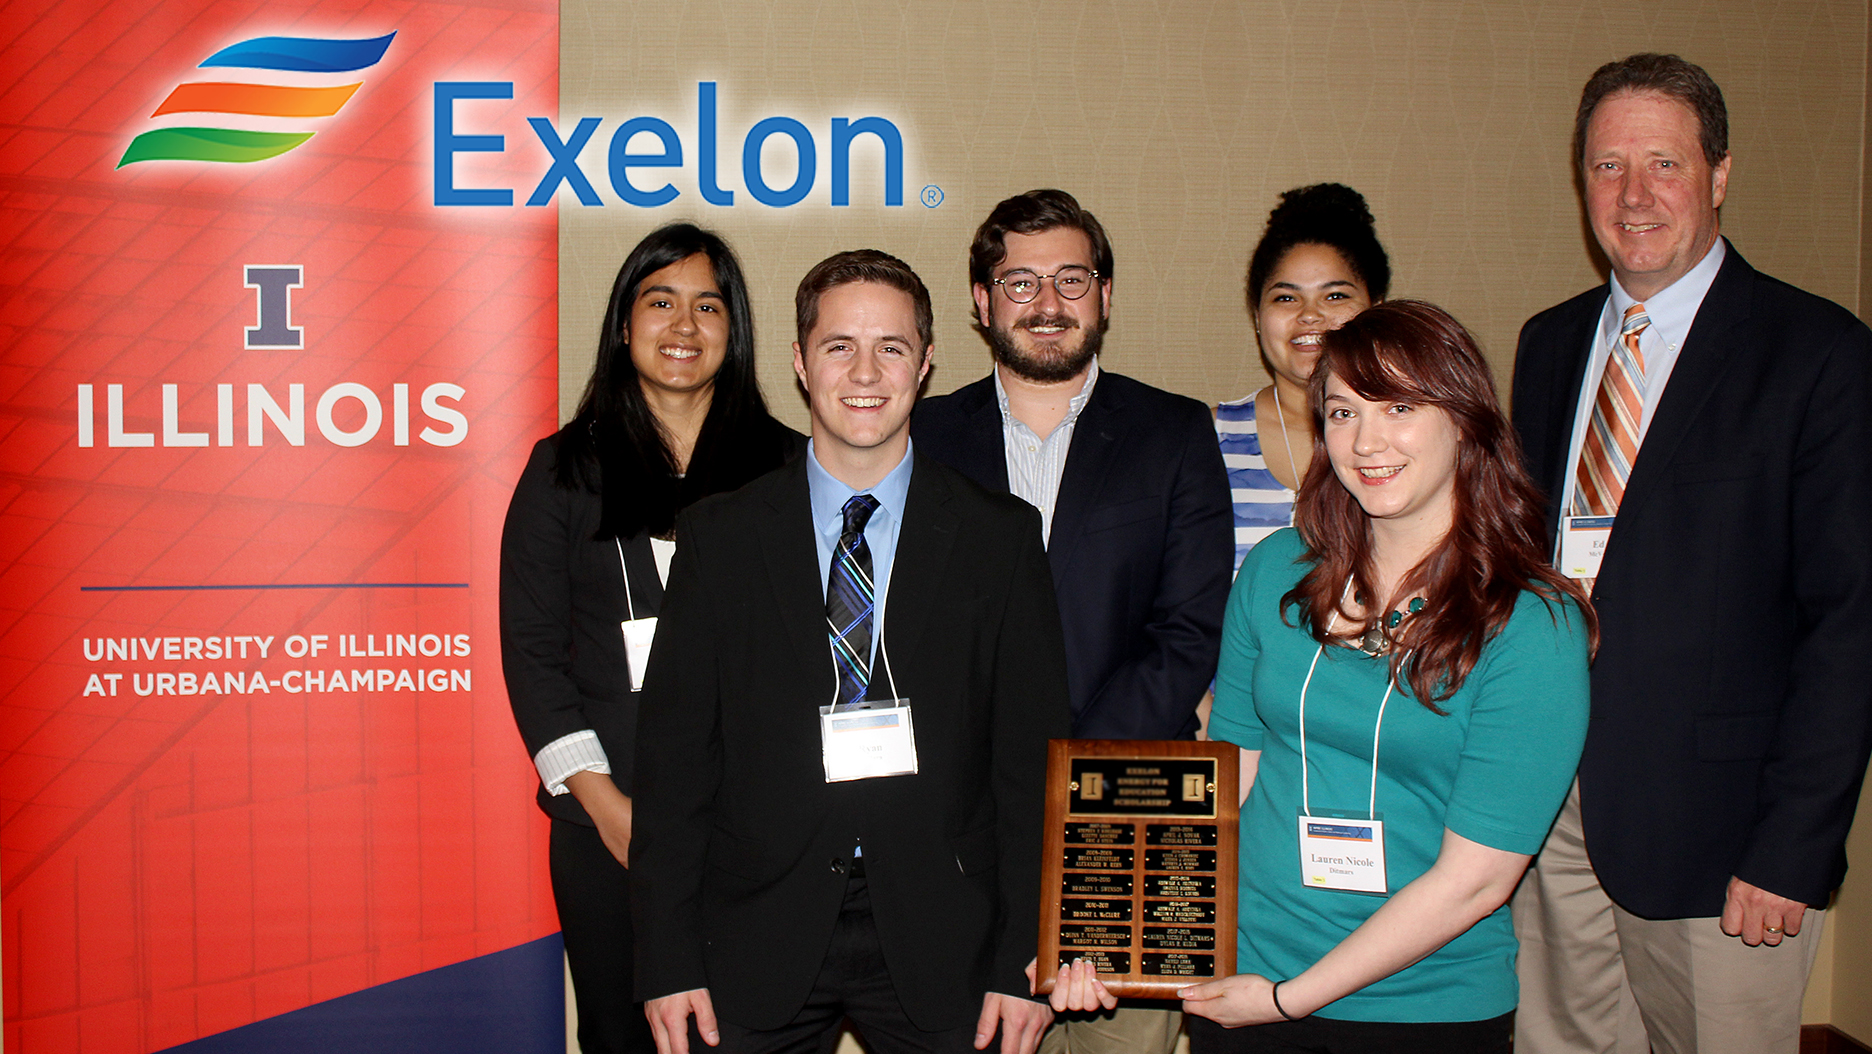 Exelon invests in Engineering Visionary Scholarship to continue long-term NPRE support